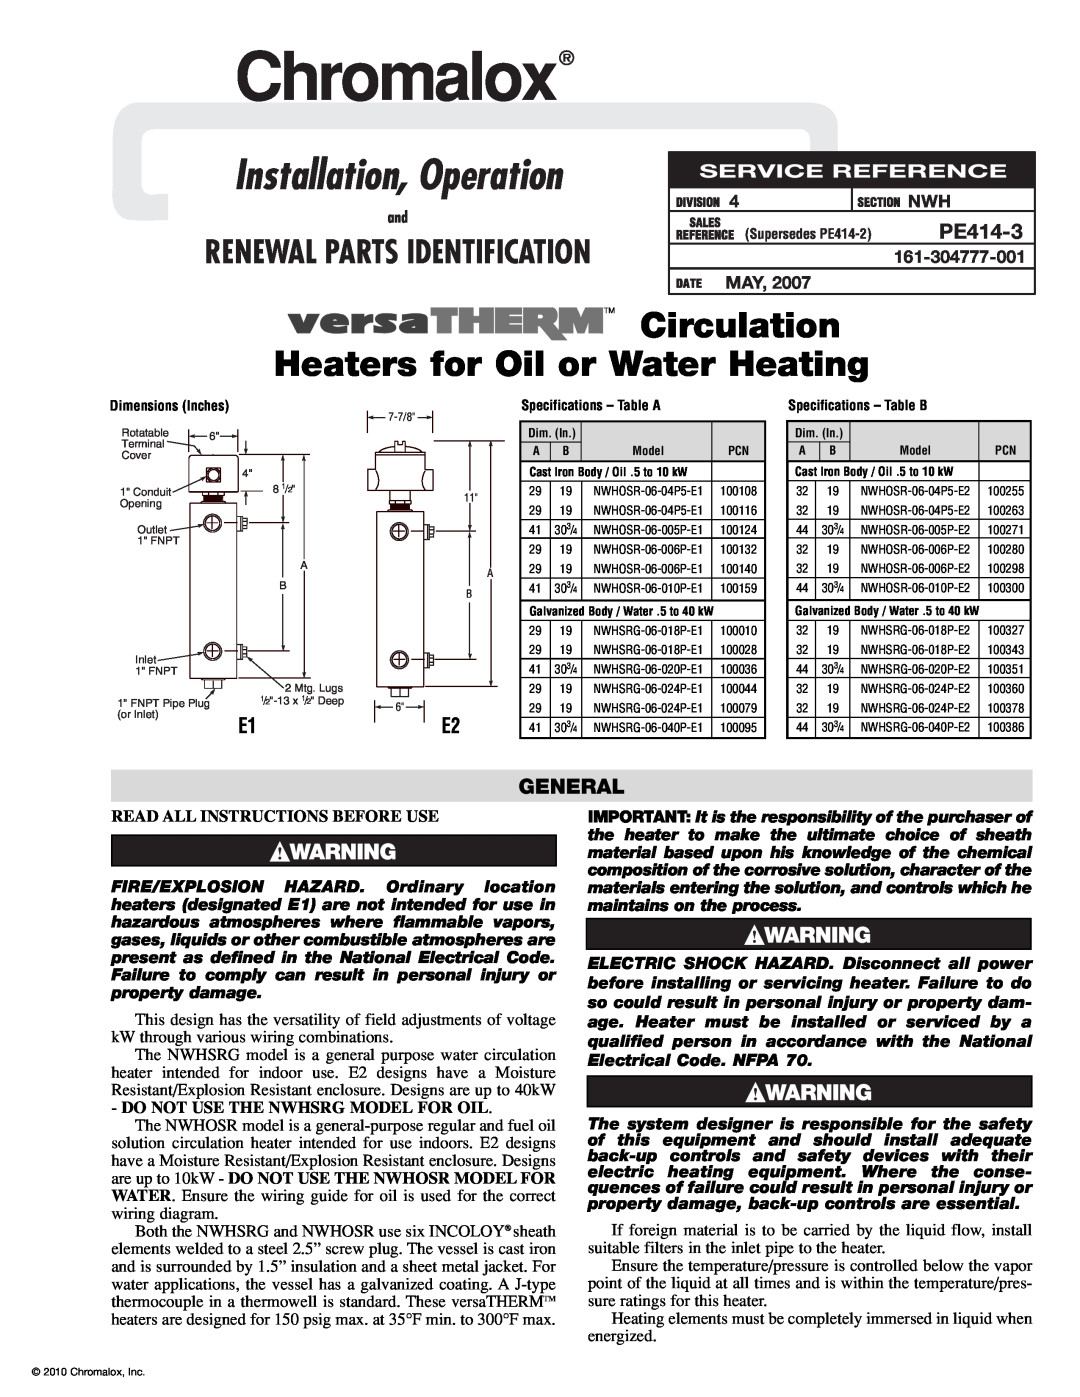 Chromalox PE414-3 specifications General, Read All Instructions Before Use, Do Not Use The Nwhsrg Model For Oil, Chromalox 